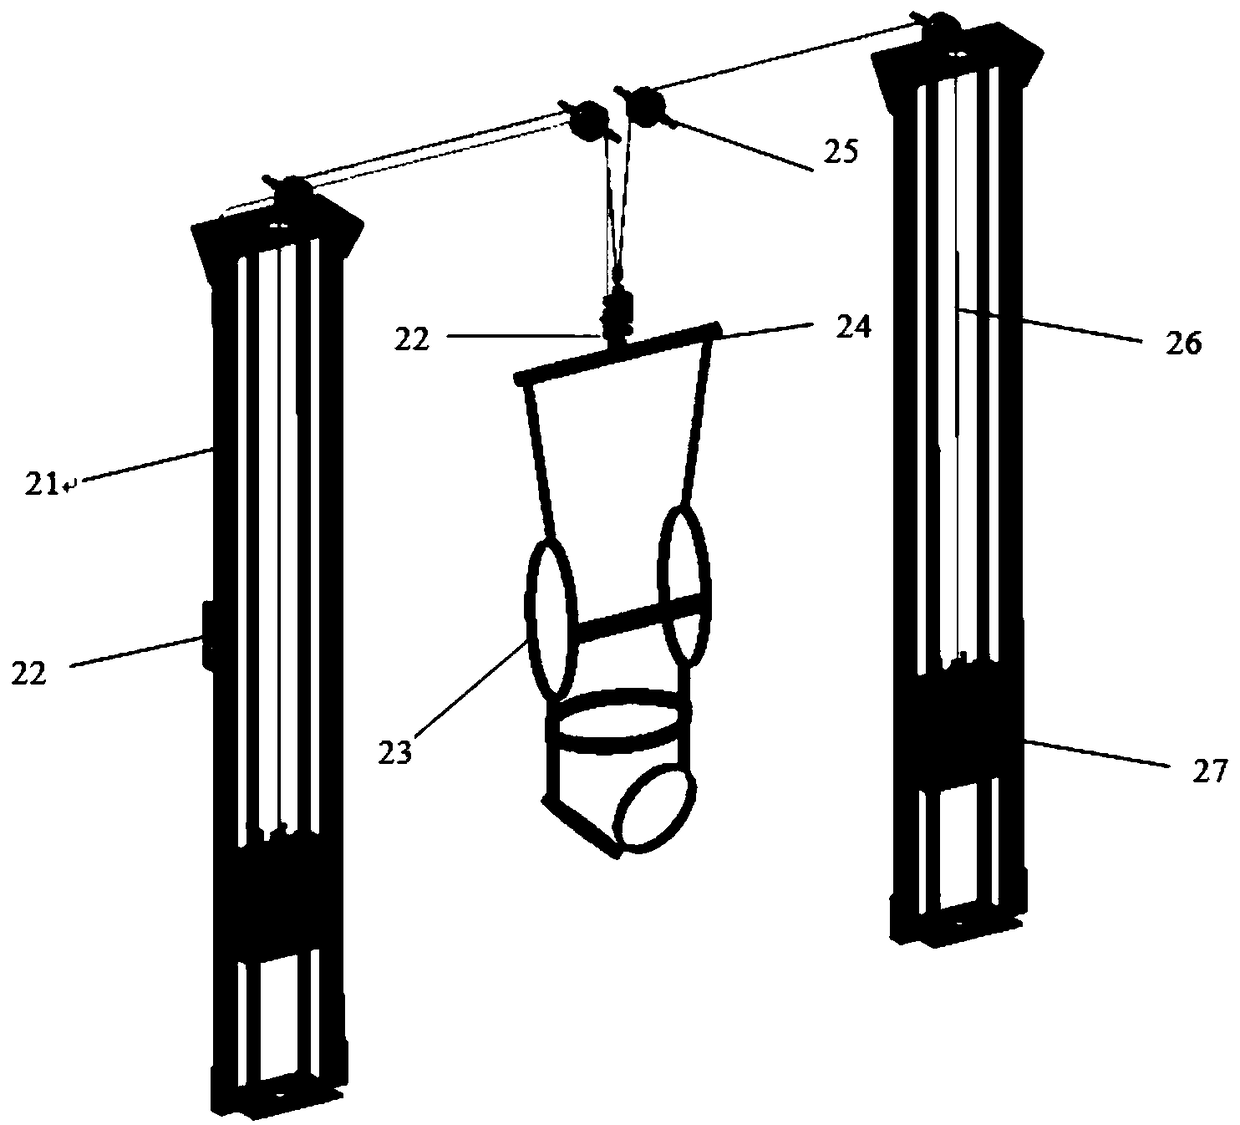 Servo suspension type low gravity simulation device for anthropometry and human body training